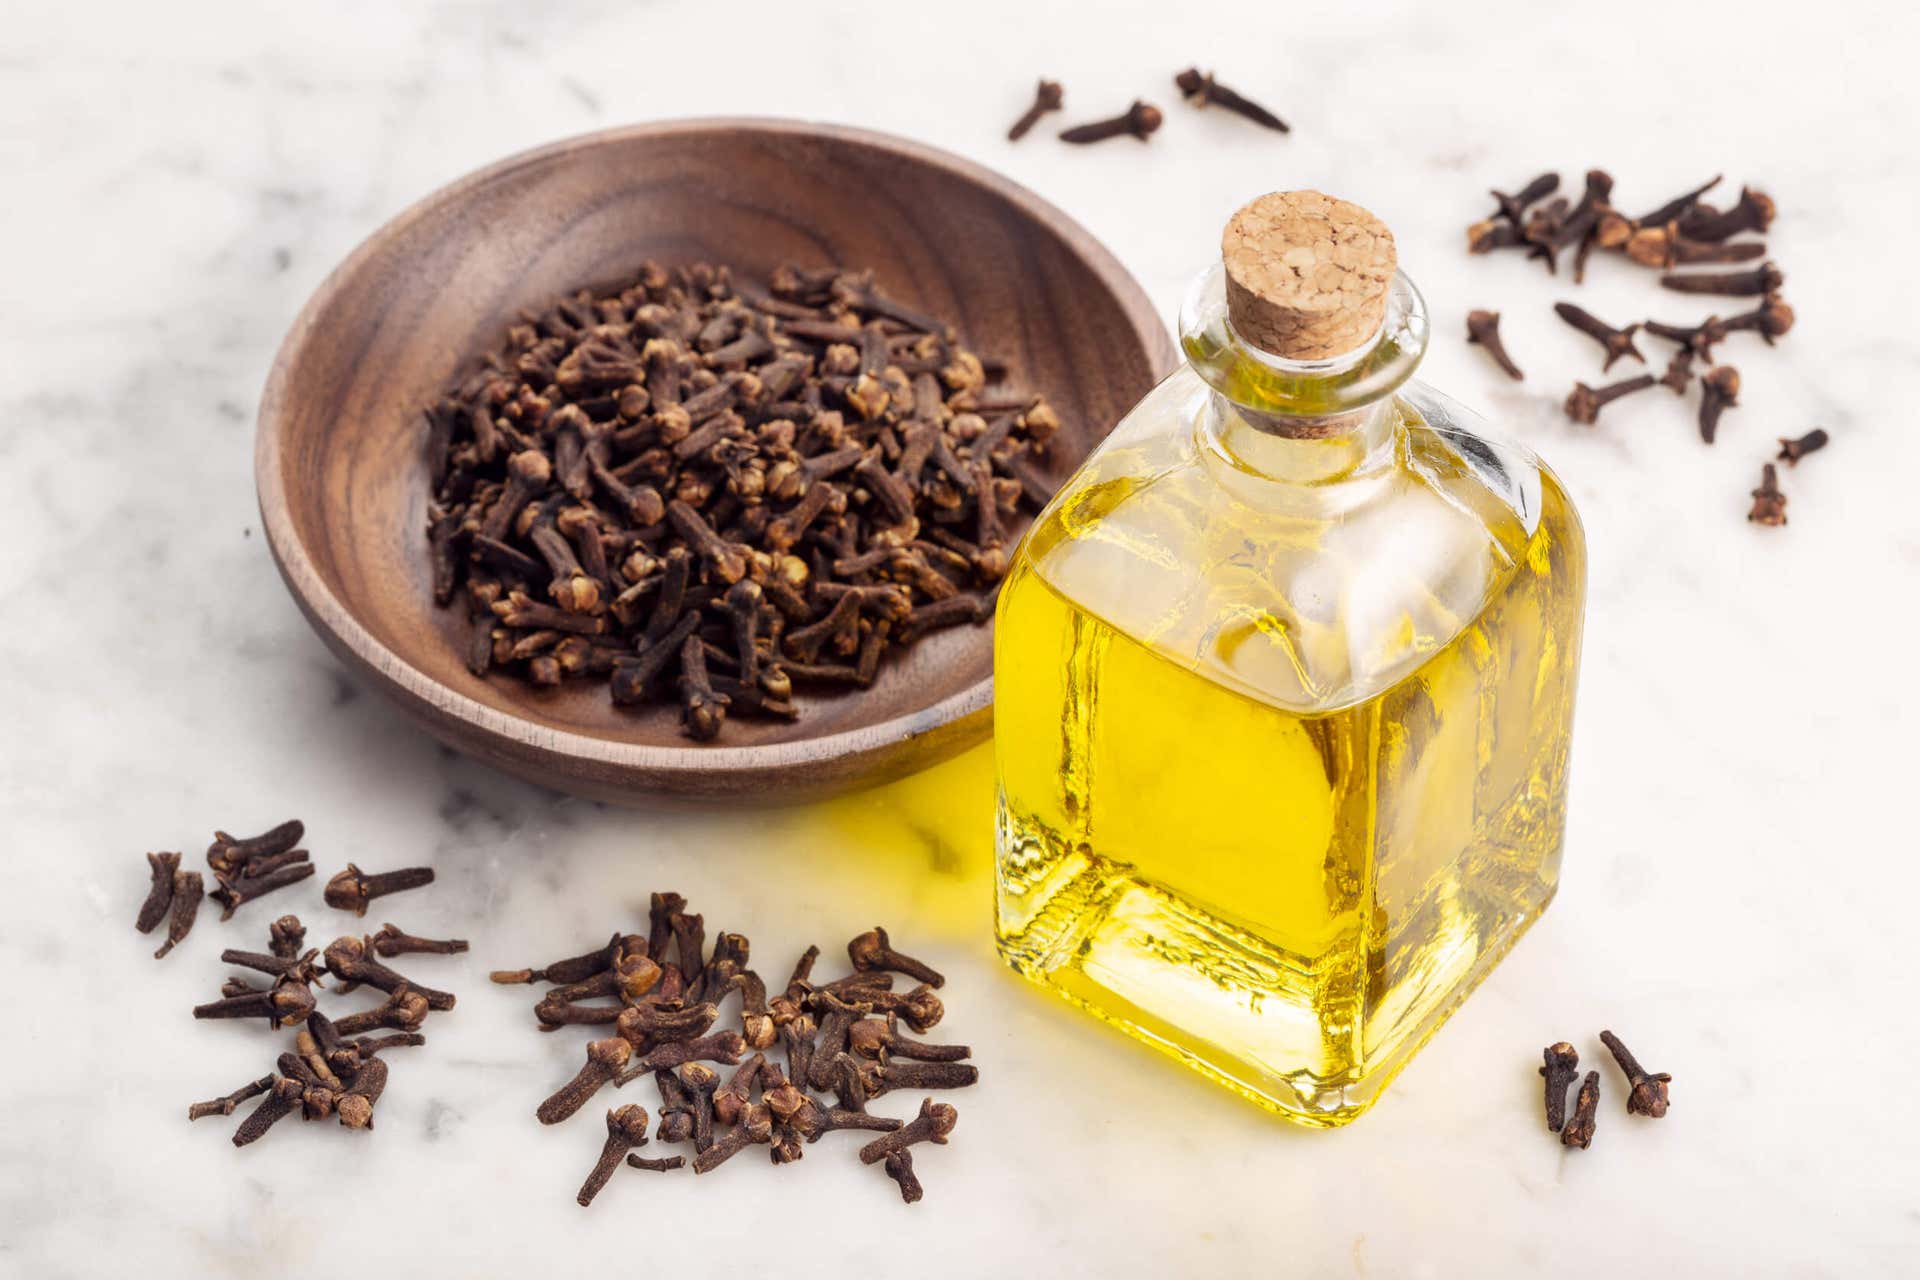 Clove is one of the ten anti-inflammatory spices for arthritis.